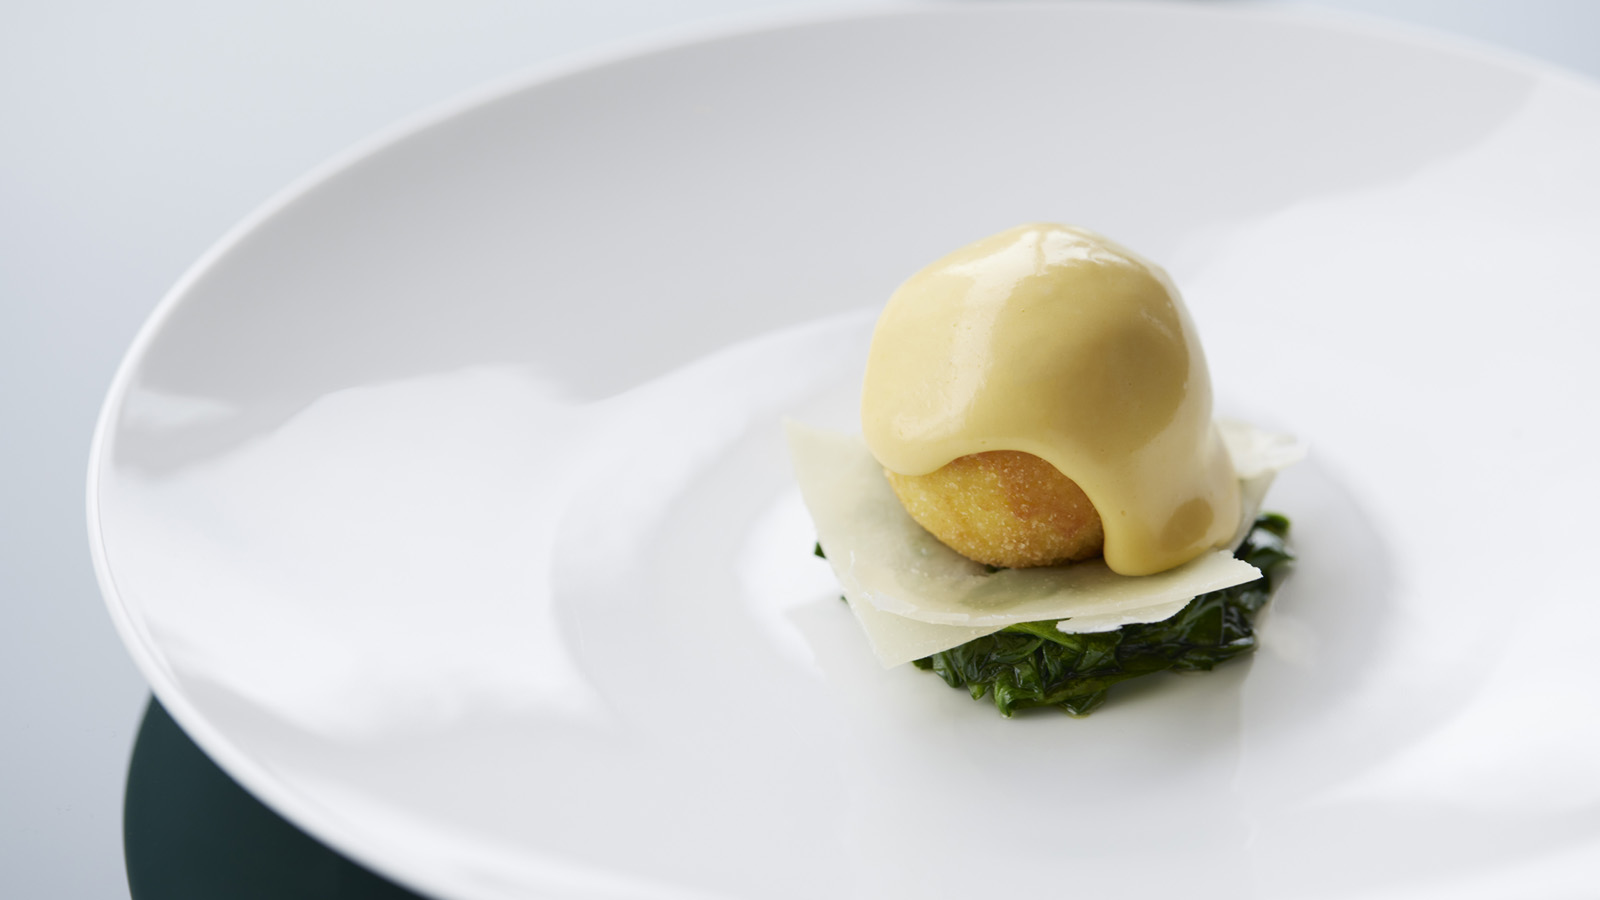 Egg Hollandaise is made with organic eggs from Yamanashi and served on a bed of comté cheese and baby leaf spinach. MAISON MARUNOUCHI Four Seasons Hotel Tokyo at Marunouchi